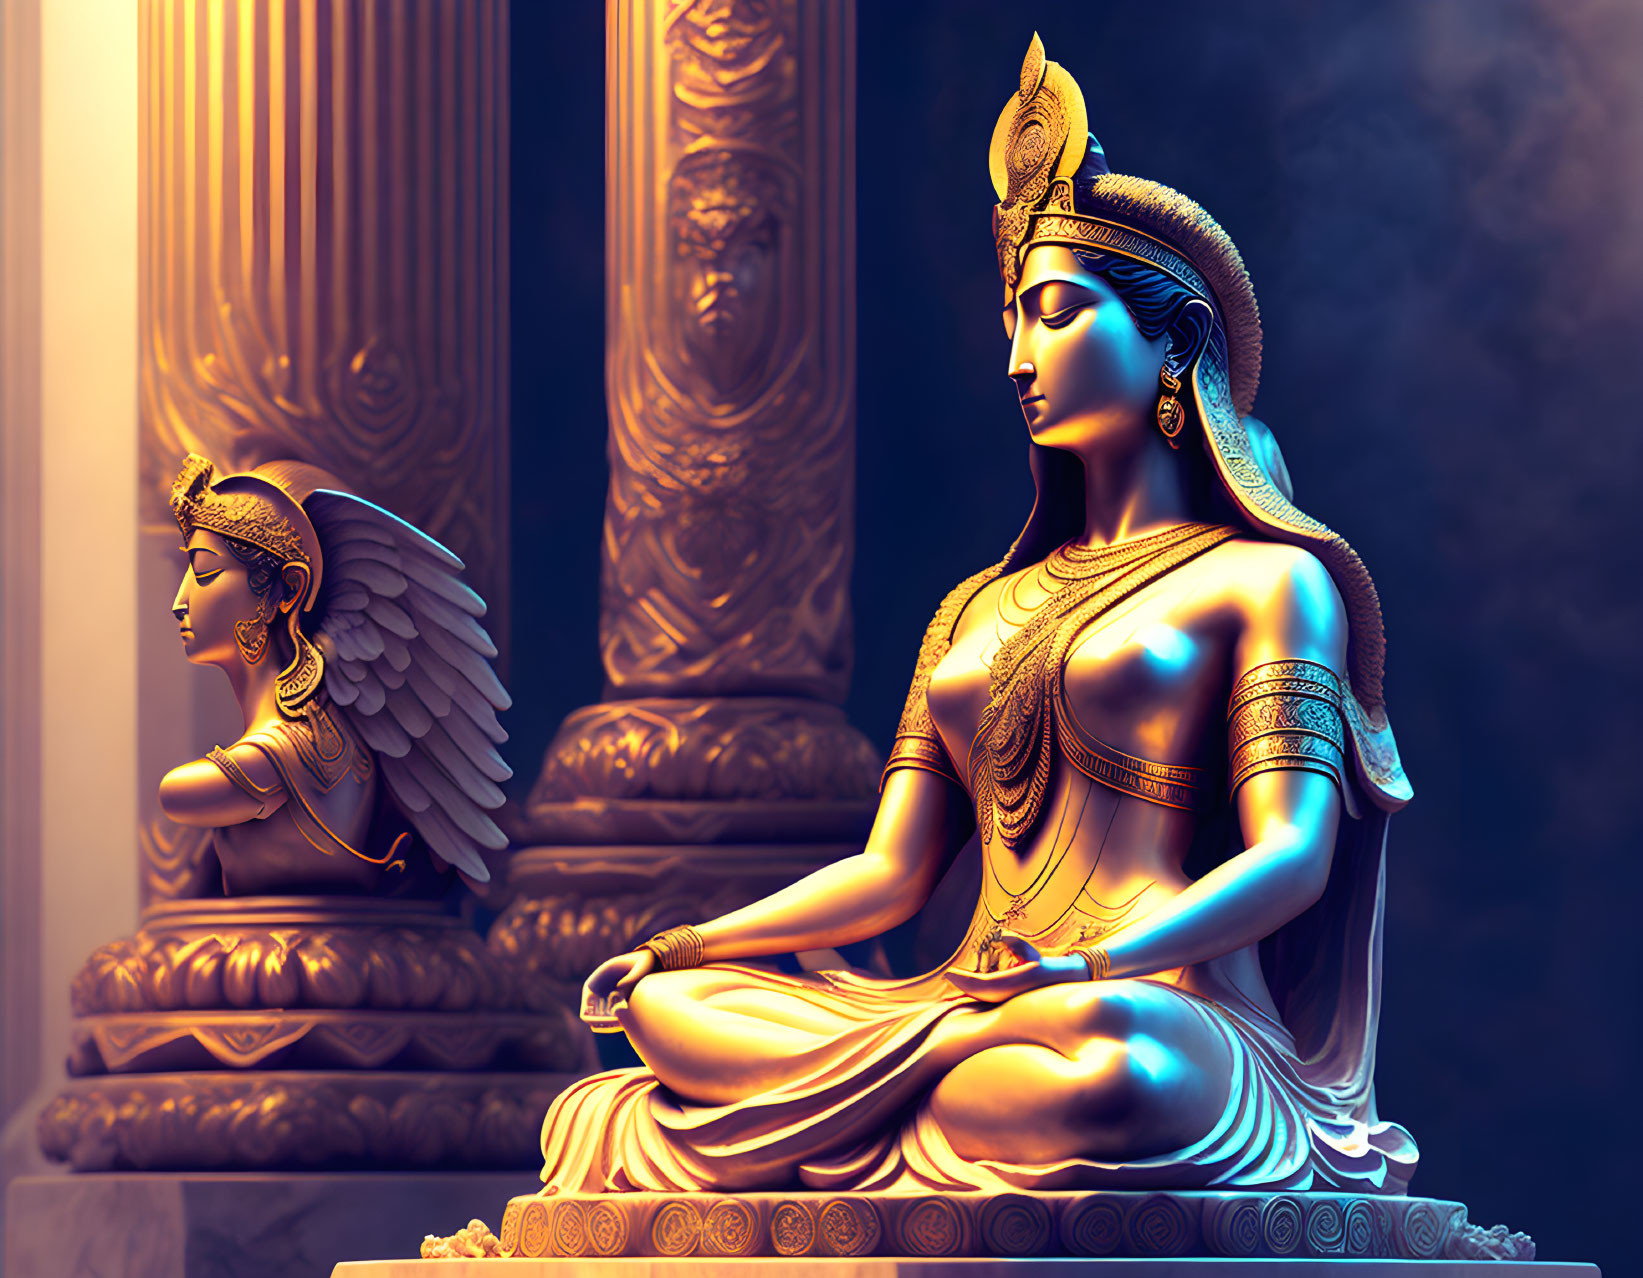 Meditating figure with crown and winged sculpture in golden-blue hue